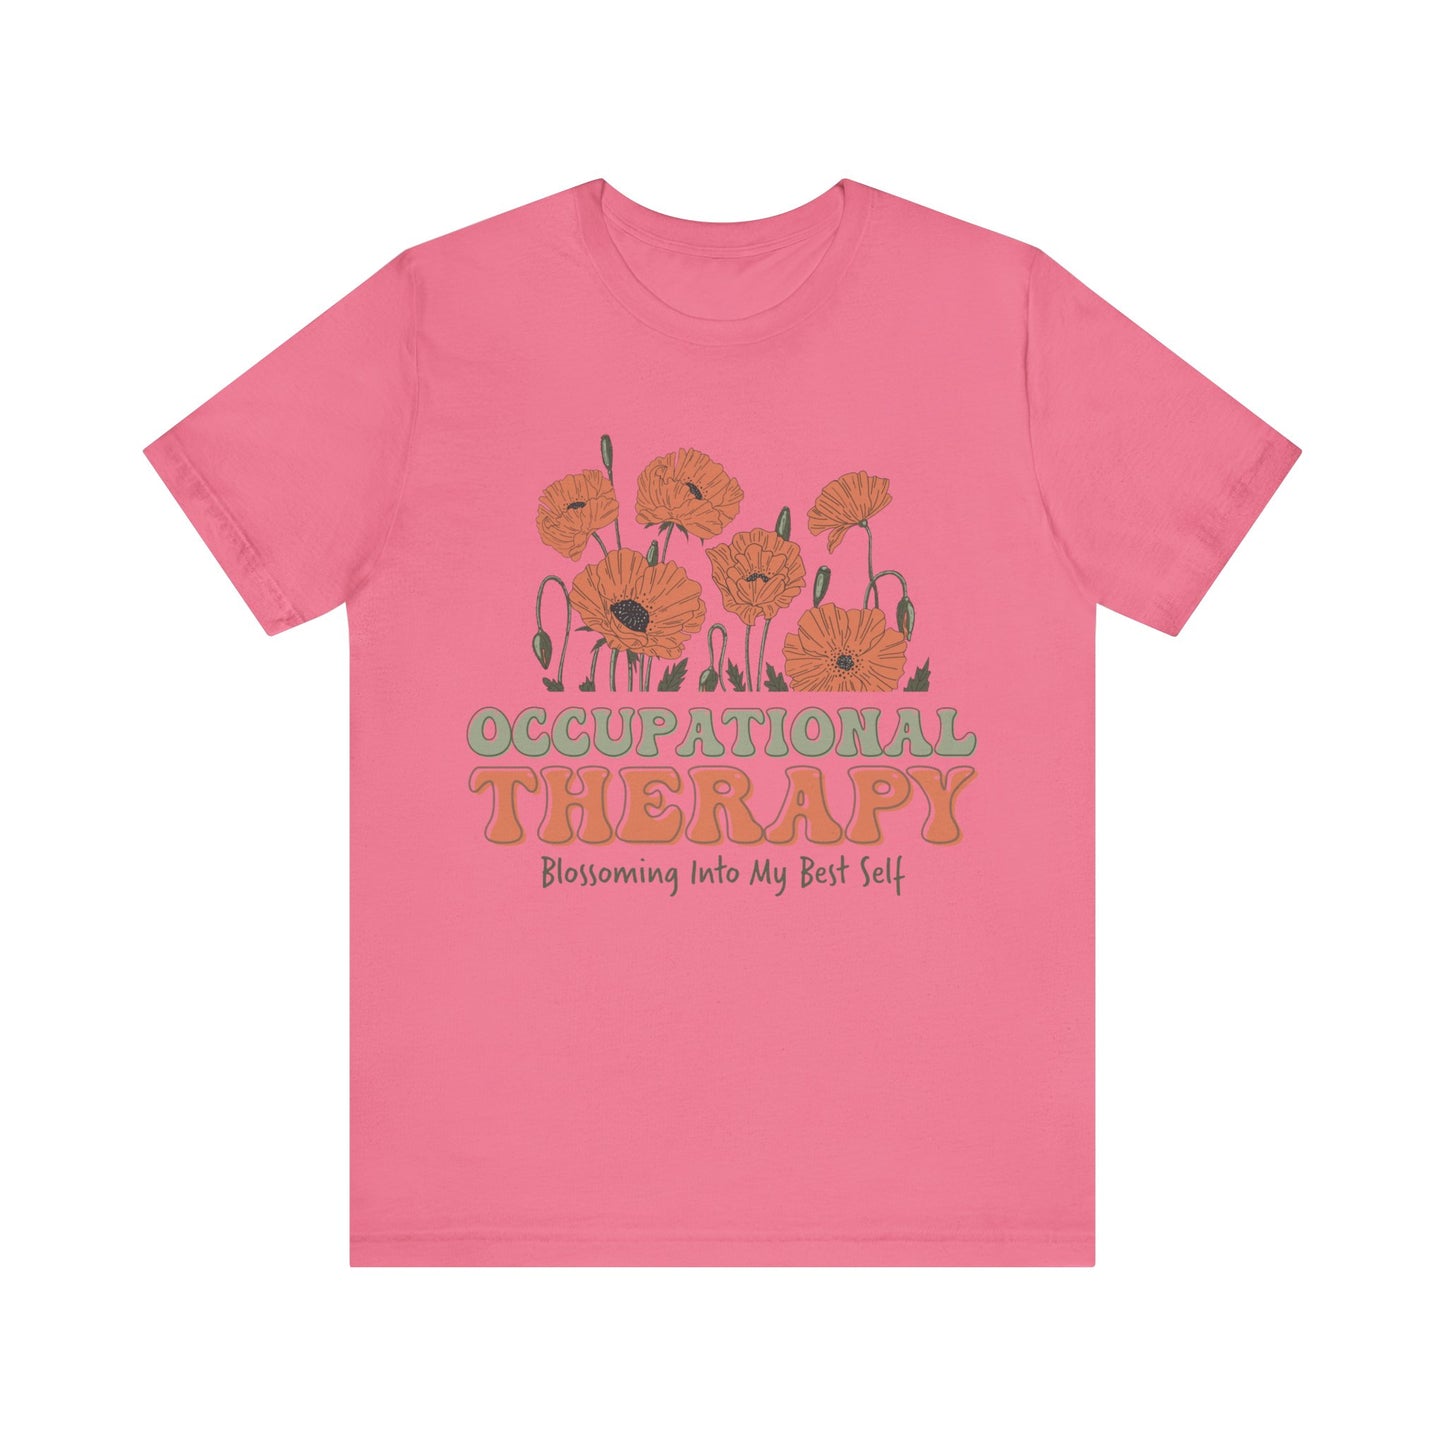 Occupational Therapy Shirt, Blossoming Into My Best Self Shirt, OT Shirt, Gift for Therapist,